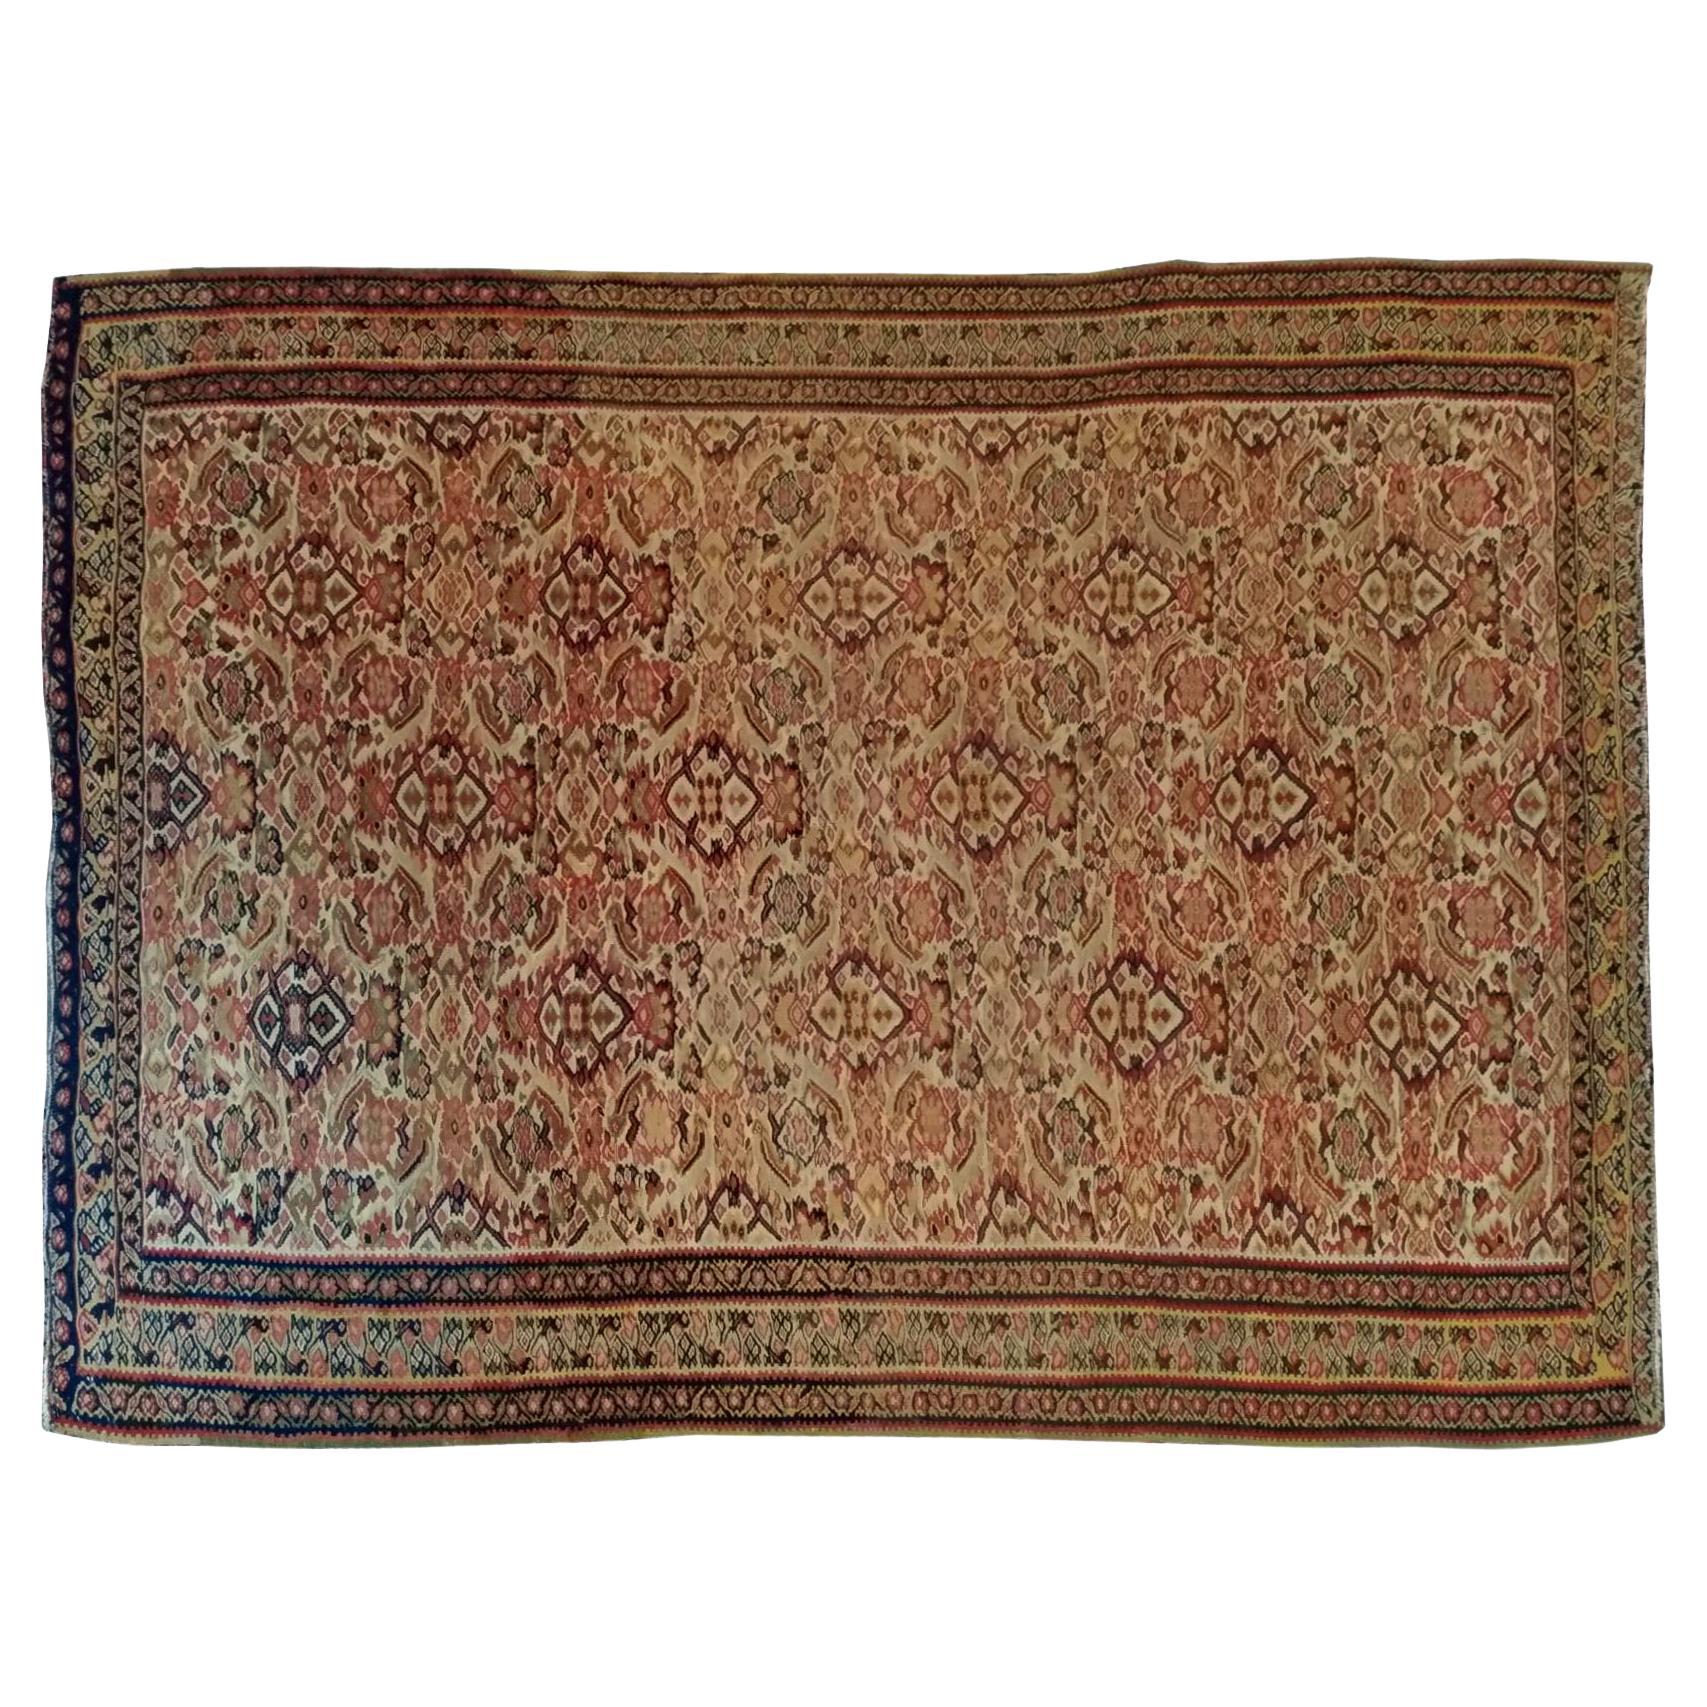 1057 -  Very Beautiful Old Kilim Senneh For Sale